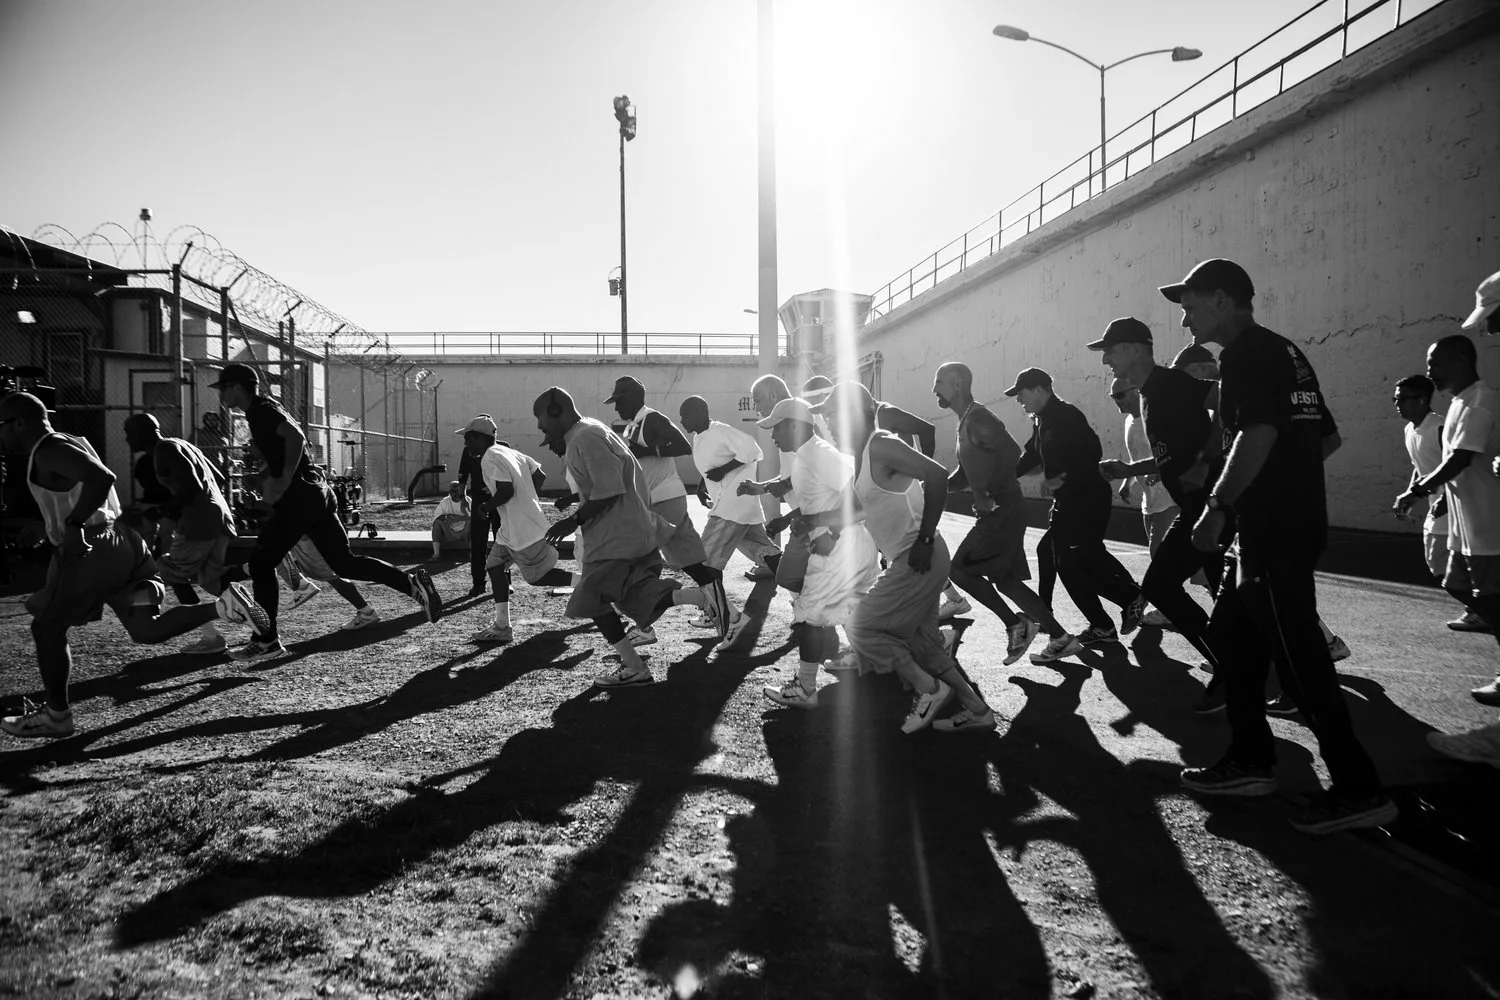 Black and white image of 20 men running with sun brightly shining in the background and long shadows. You can see the prison walls and barbed wire in the background.